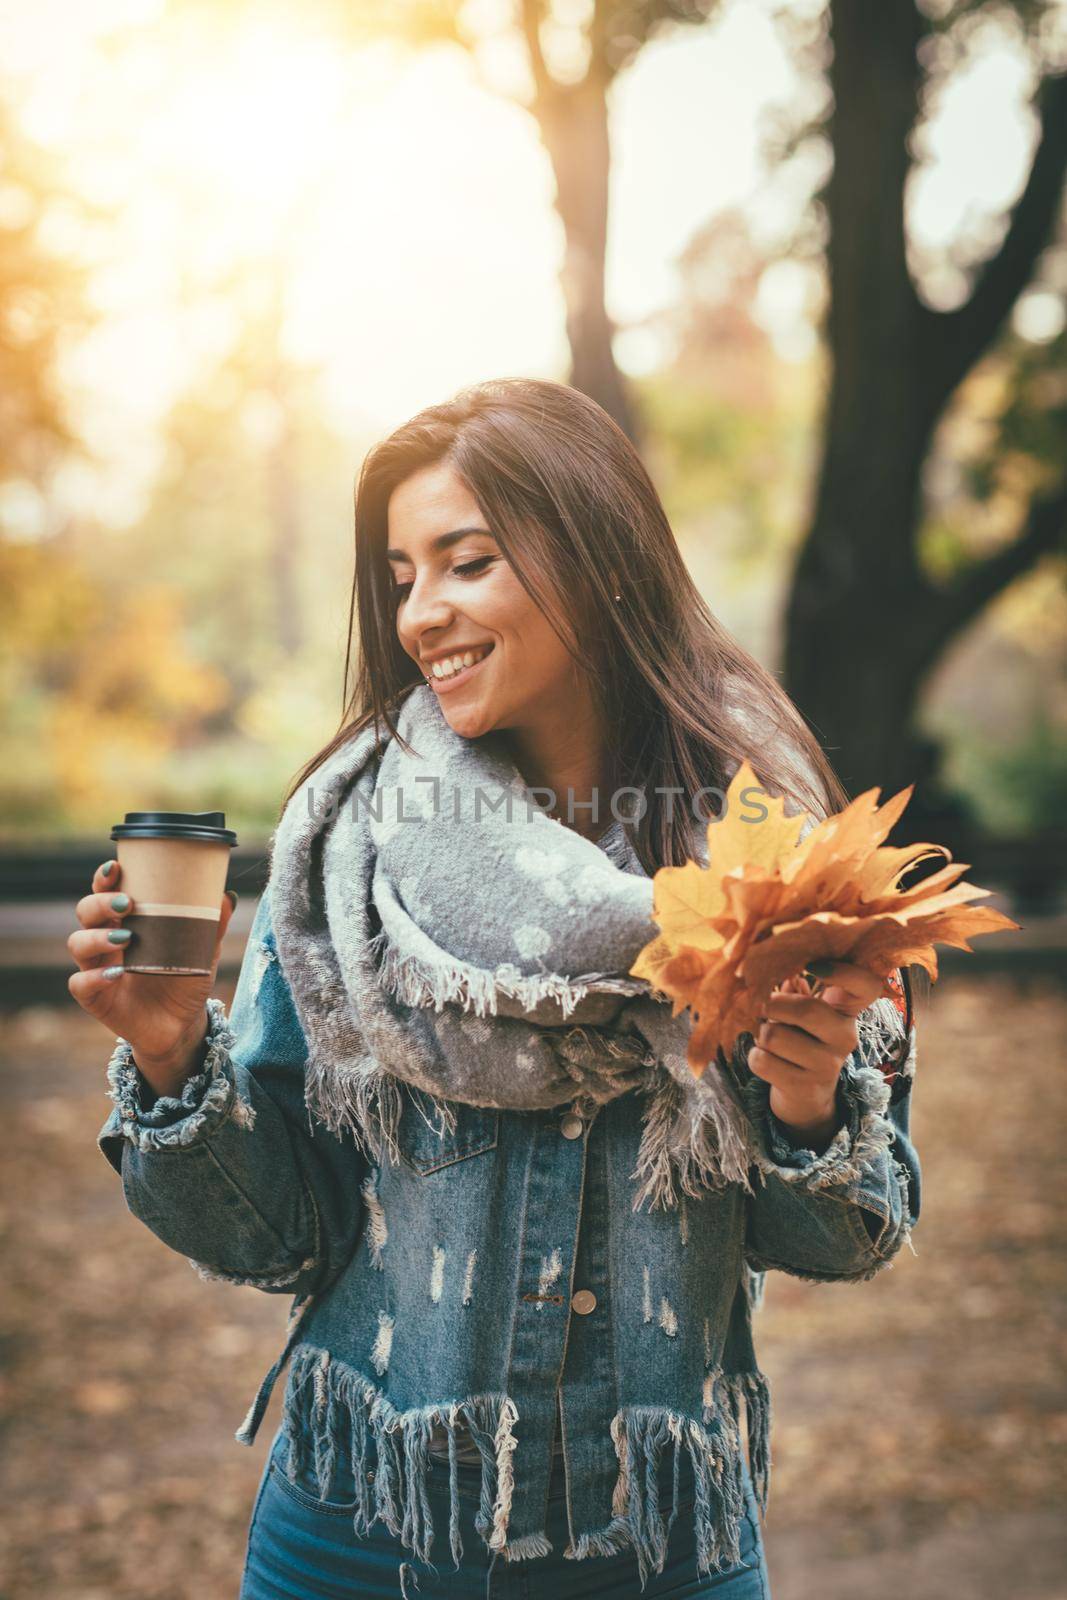 Cute young woman enjoying in sunny forest in autumn colors. She is holding golden yellow leaves and cup of cofee.